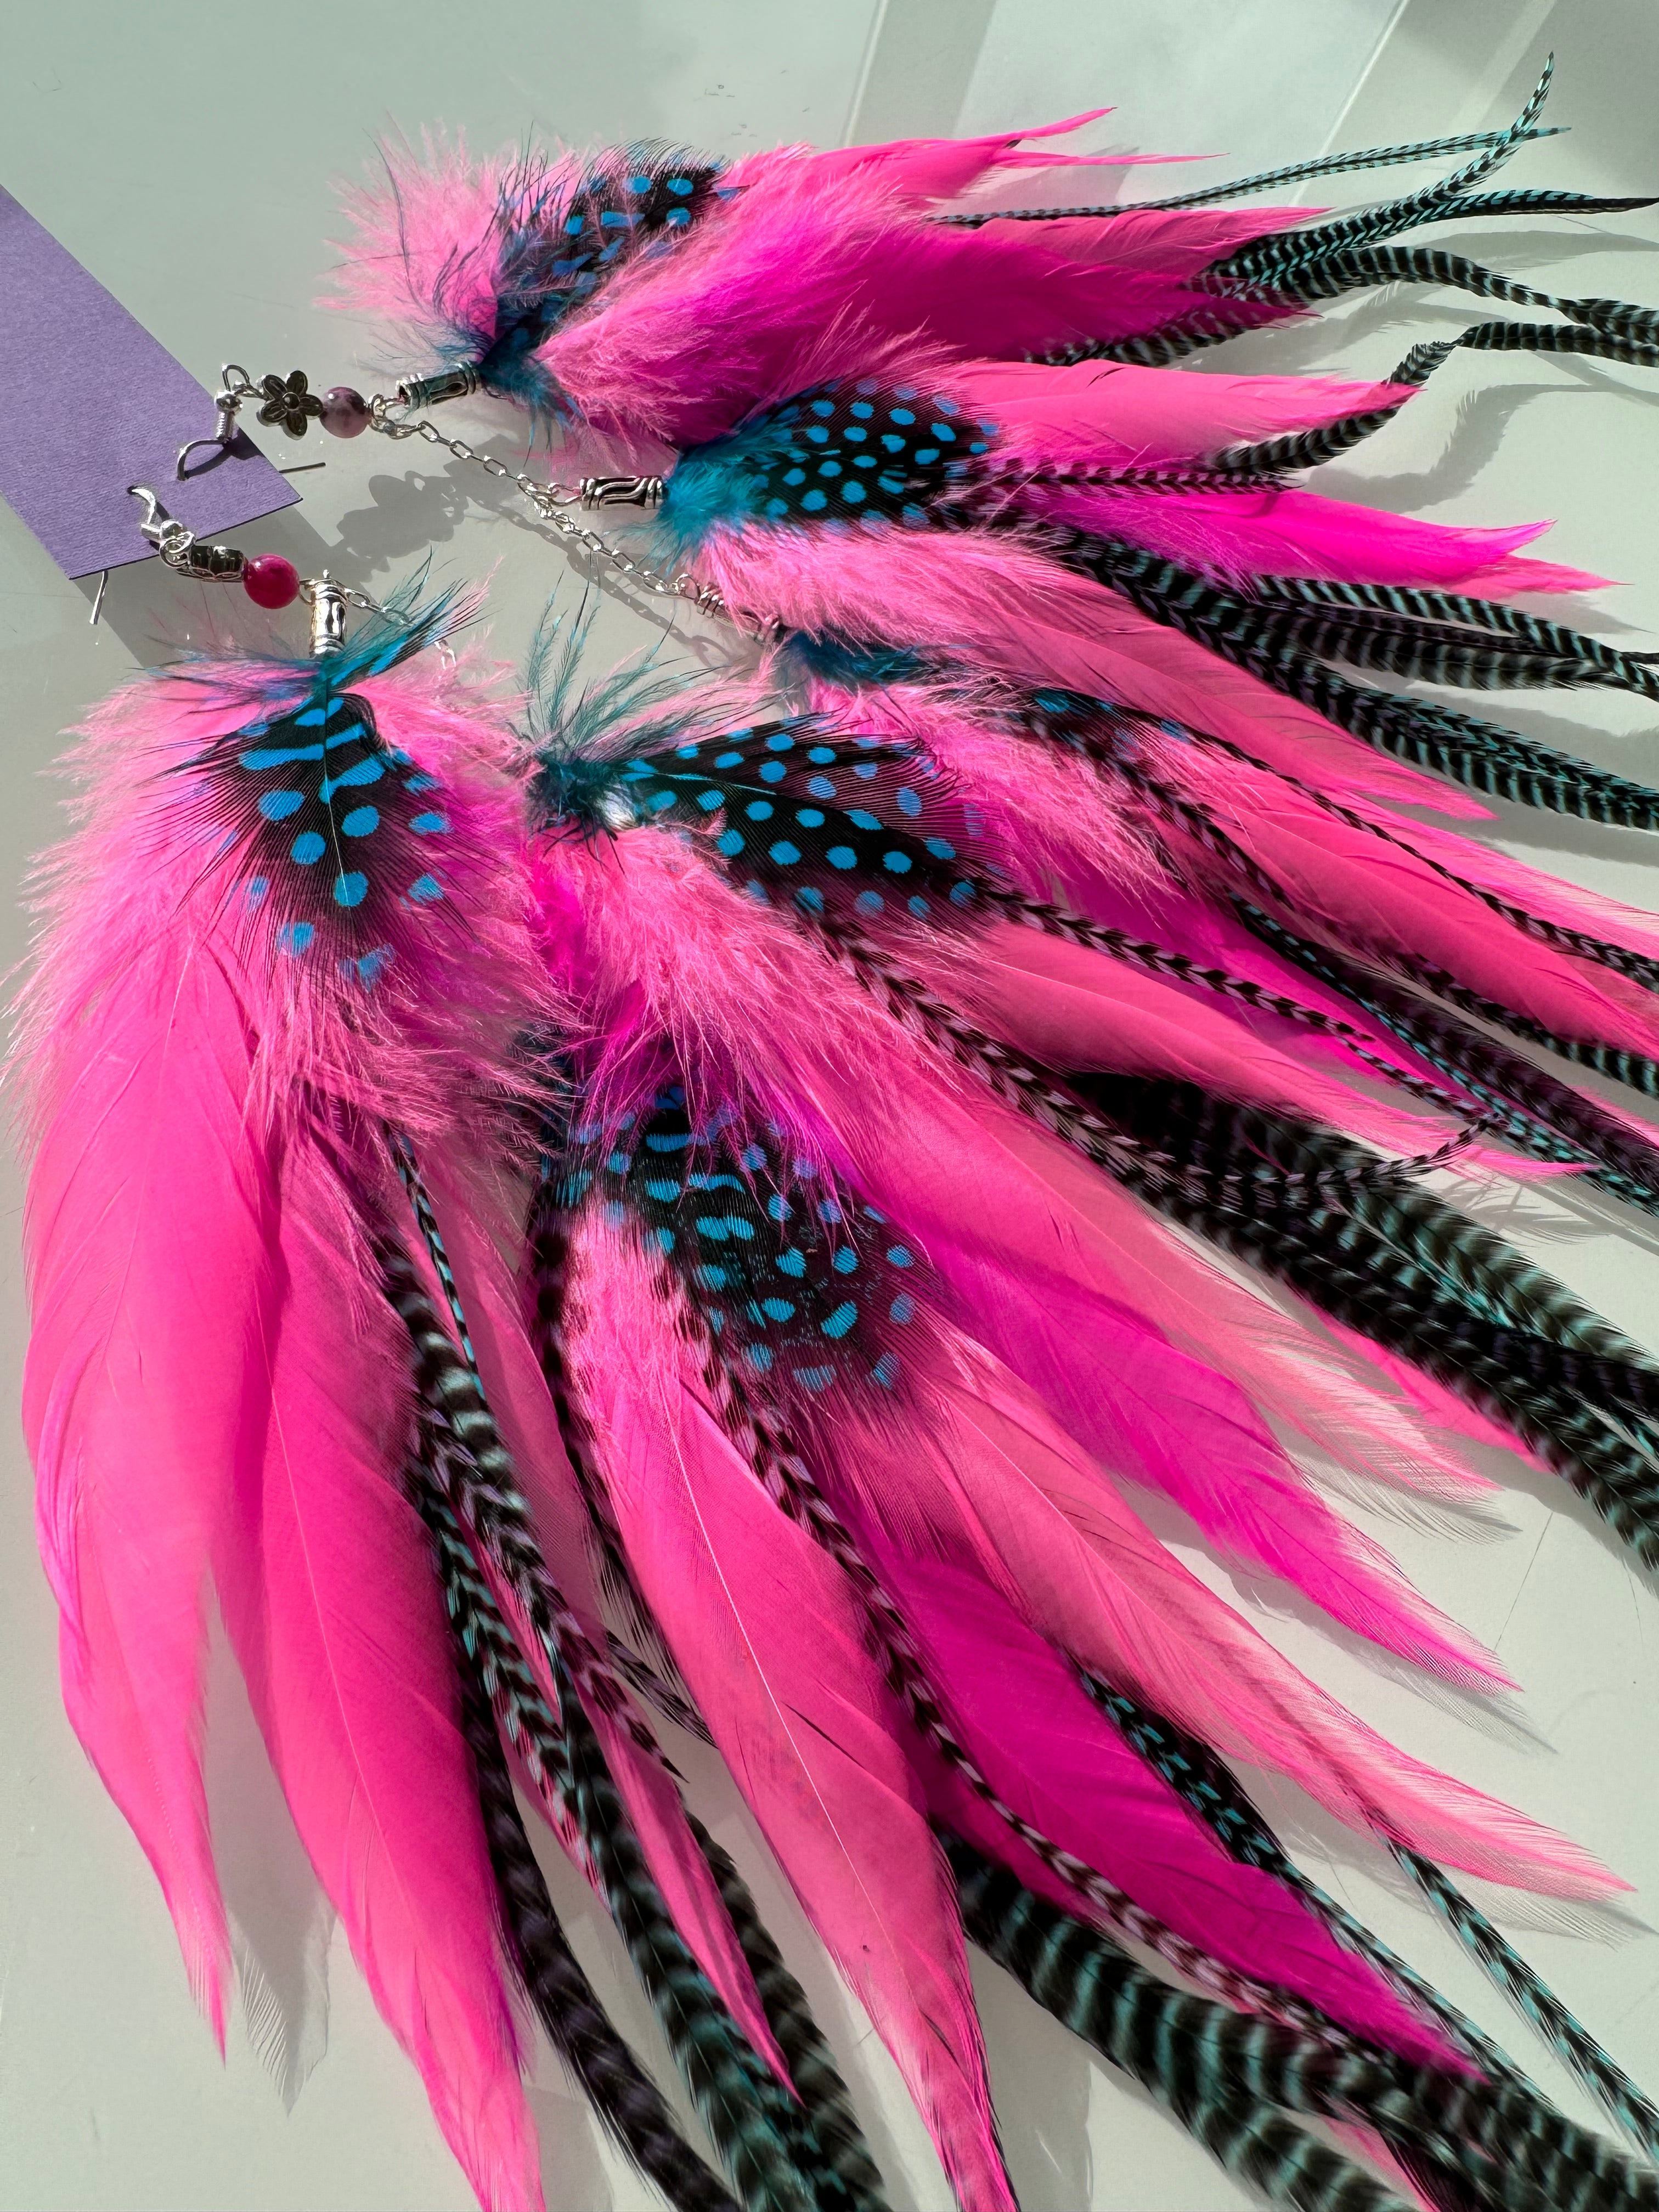 CHENGRUI L75,ostrich feather,jewelry accessories,diy earrings findings,Feather  earrings,diy making,feathers,2pcs/bag